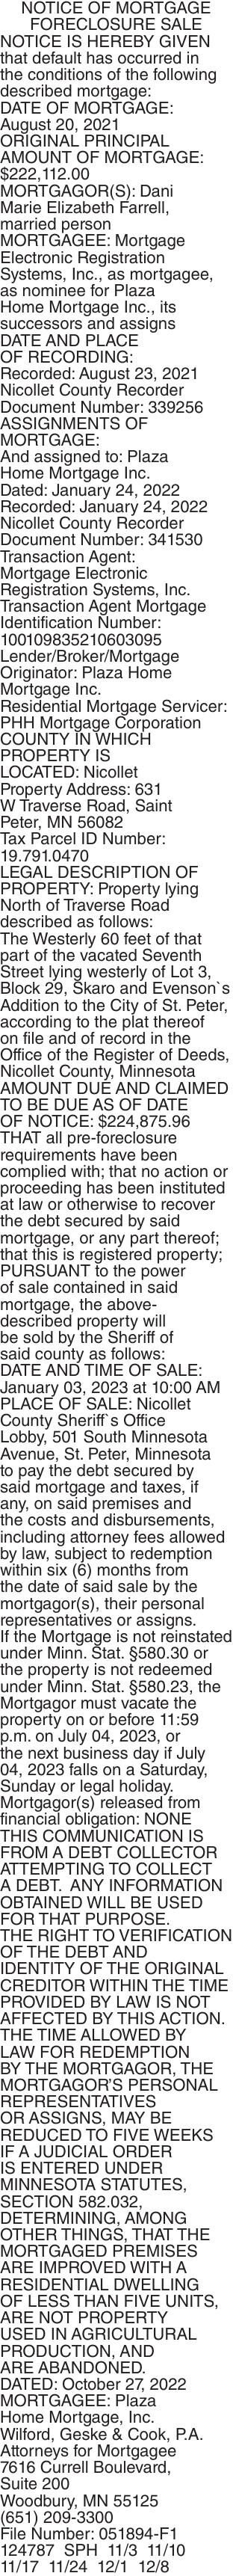 NOTICE OF MORTGAGE FORECLOSURE SALE